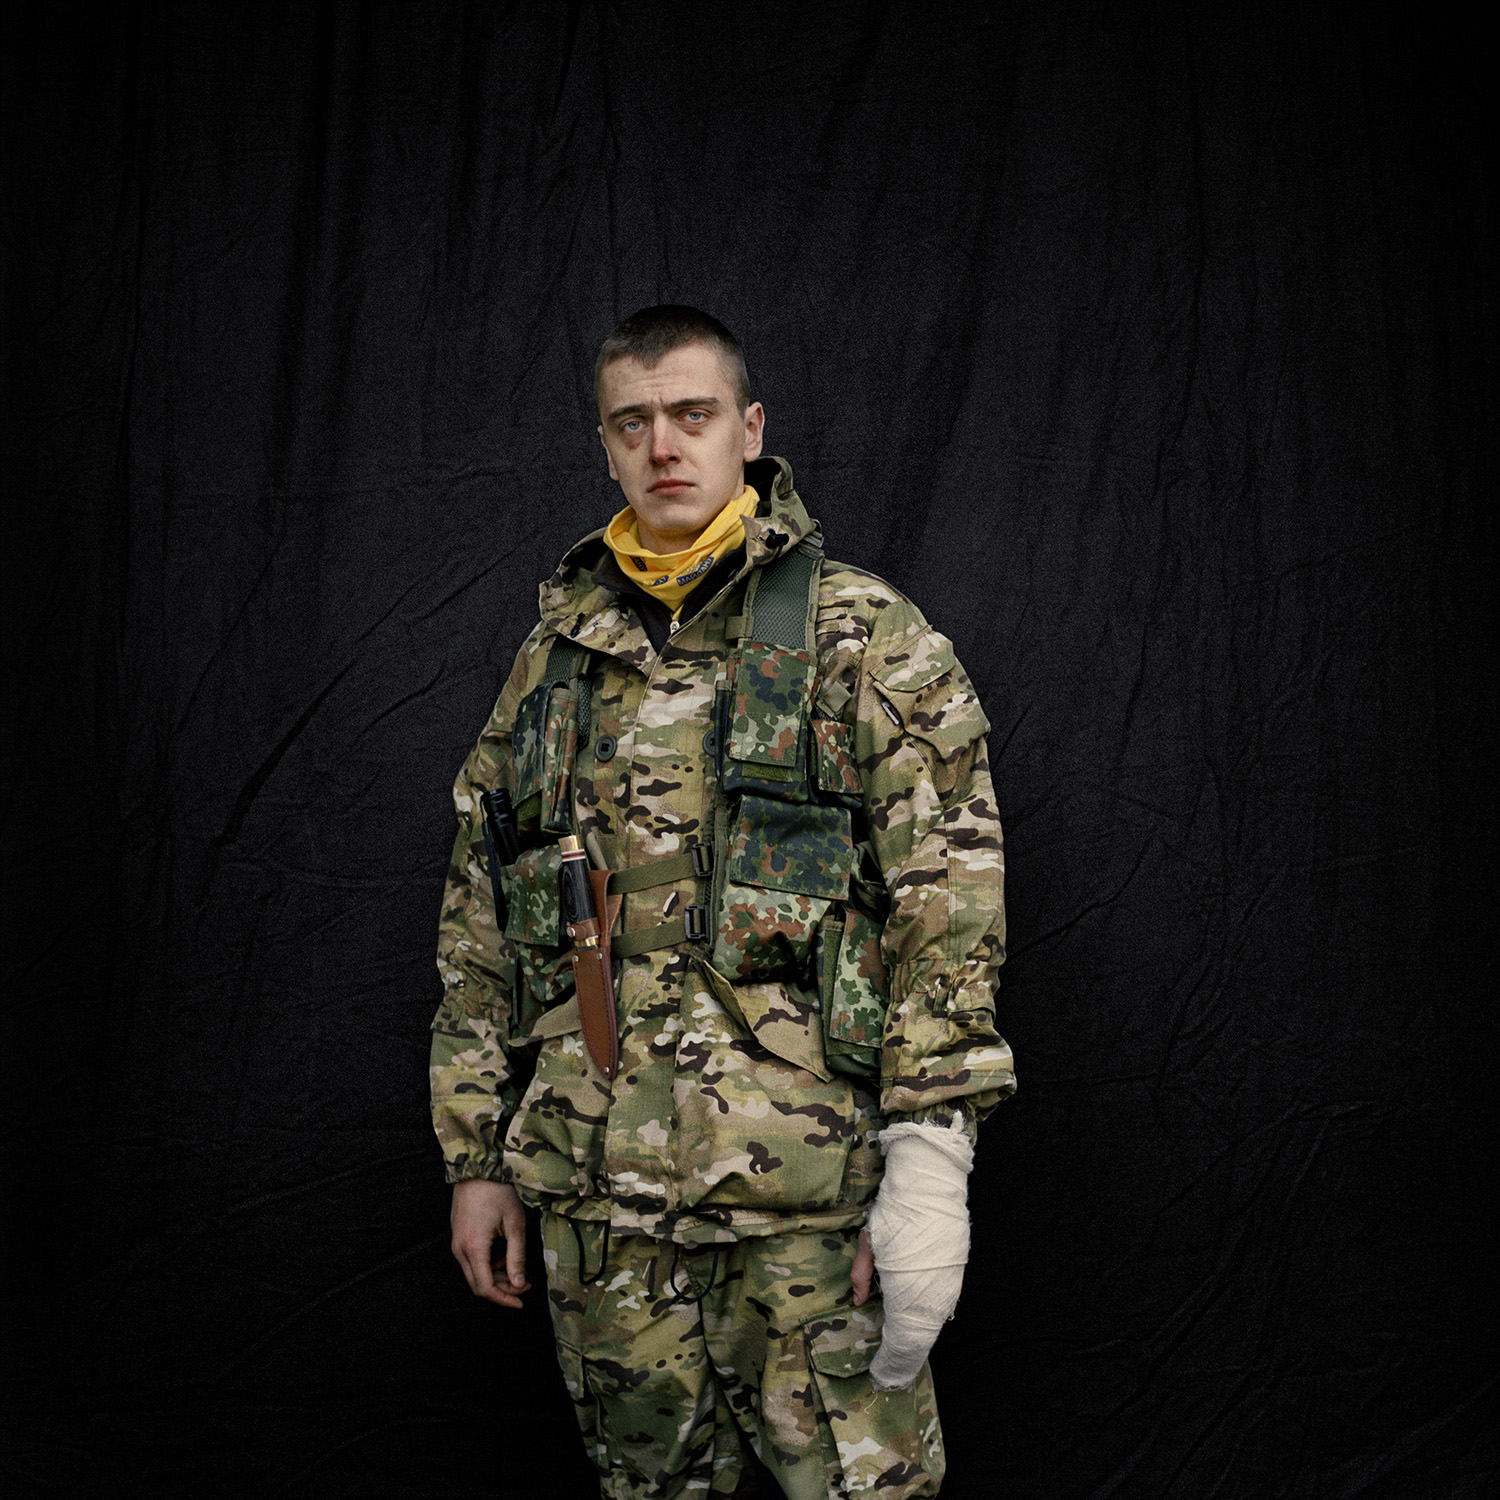 Maidan, Portraits from the Black Square